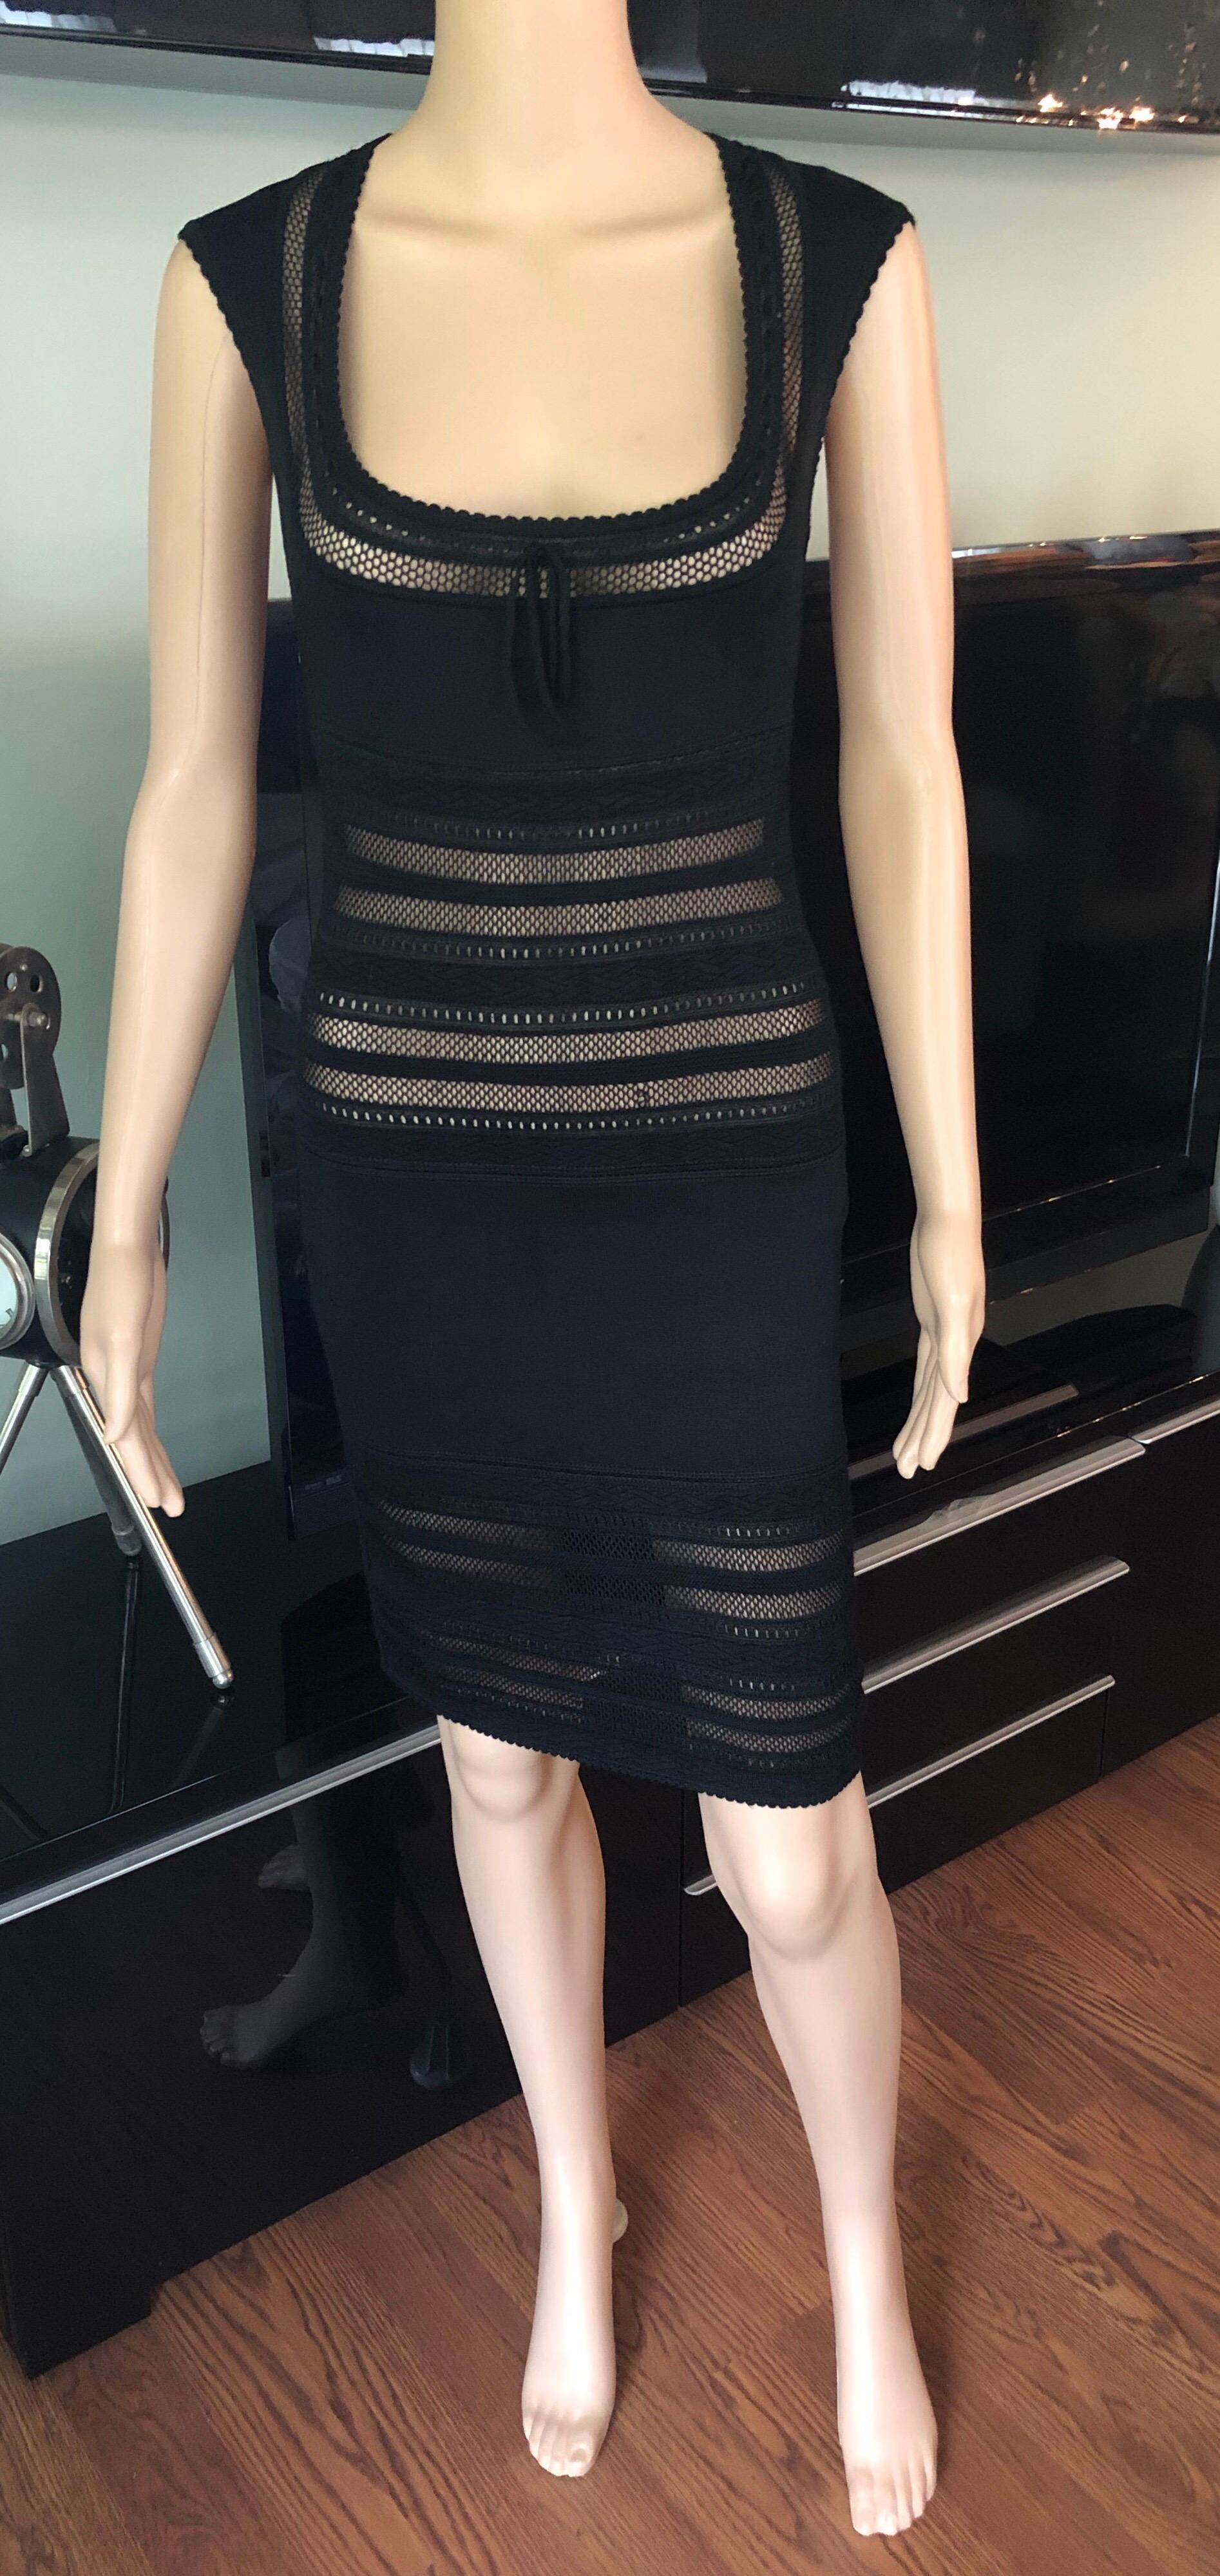 Azzedine Alaia 1990's Vintage Fitted Semi-Sheer Bodycon Black  Dress Size XS

Alaïa sleeveless bodycon mini dress with open knit paneling throughout, scoop neck featuring tonal bow accent at collar, scalloped trim and concealed zip closure at center